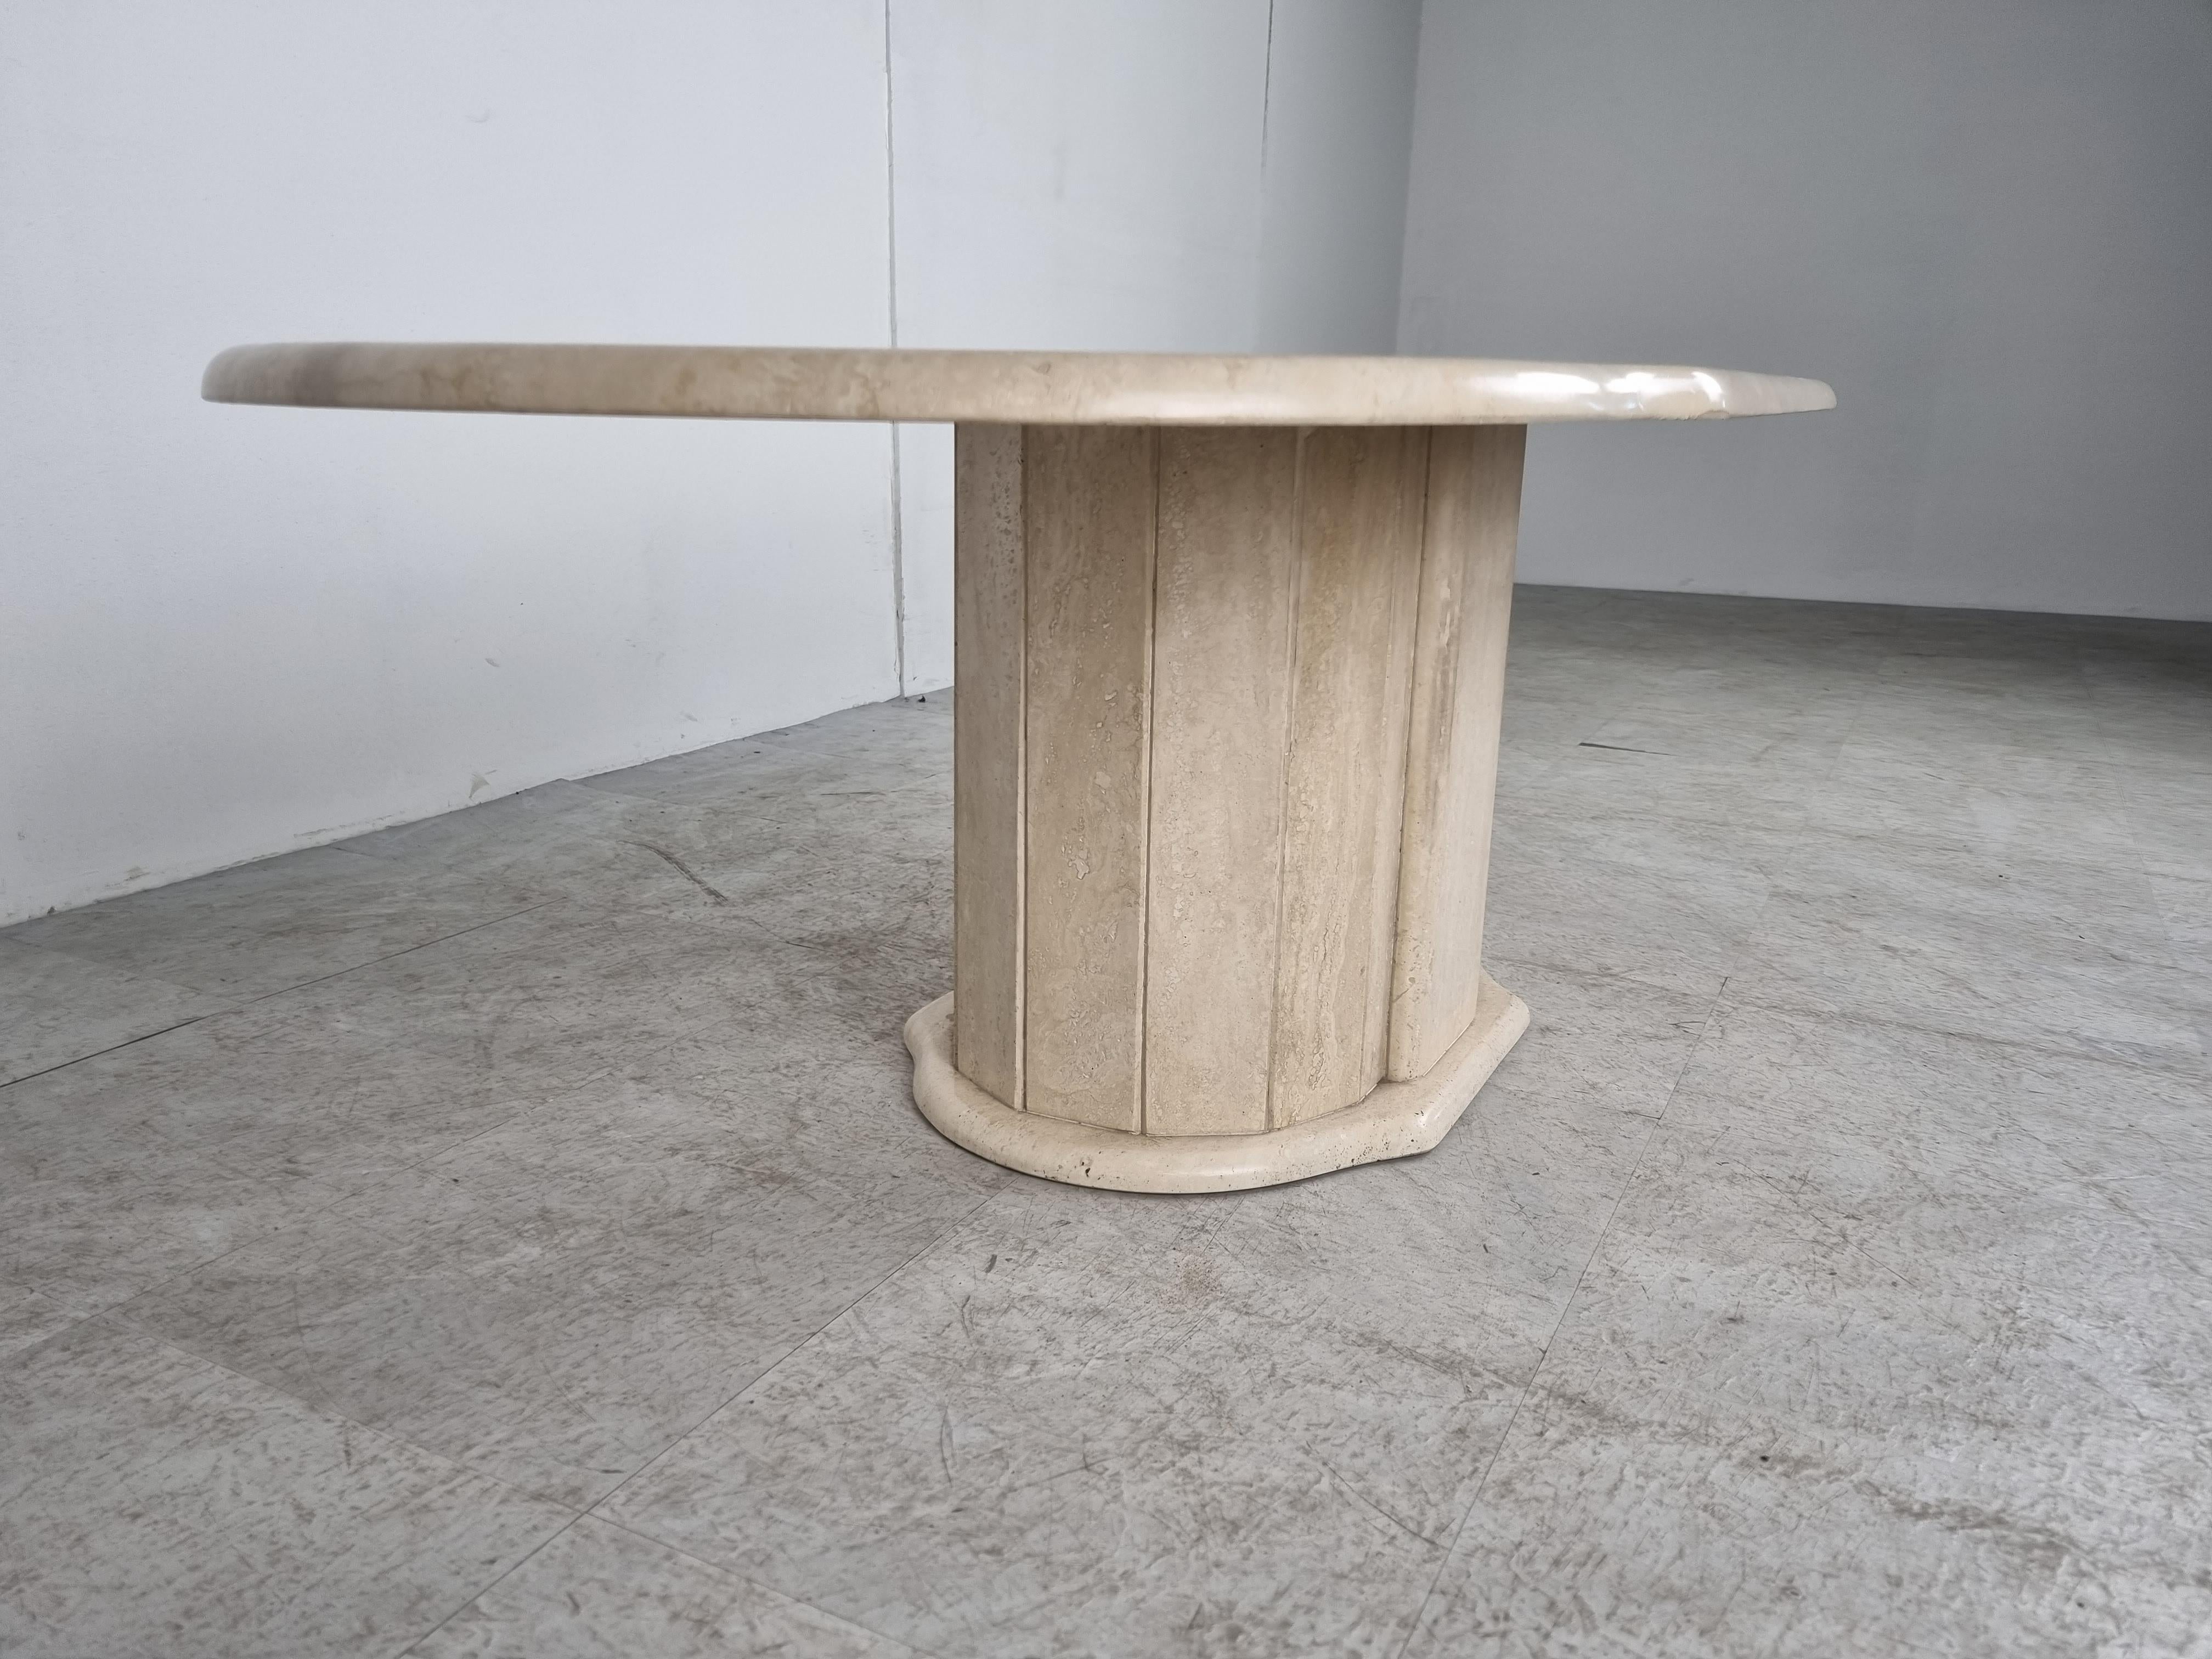 Beautifully shaped travertine coffee table.

Beautiful natural vaining.

Good condition

1980s - Italy

Dimensions
Height: 44cm/17.32